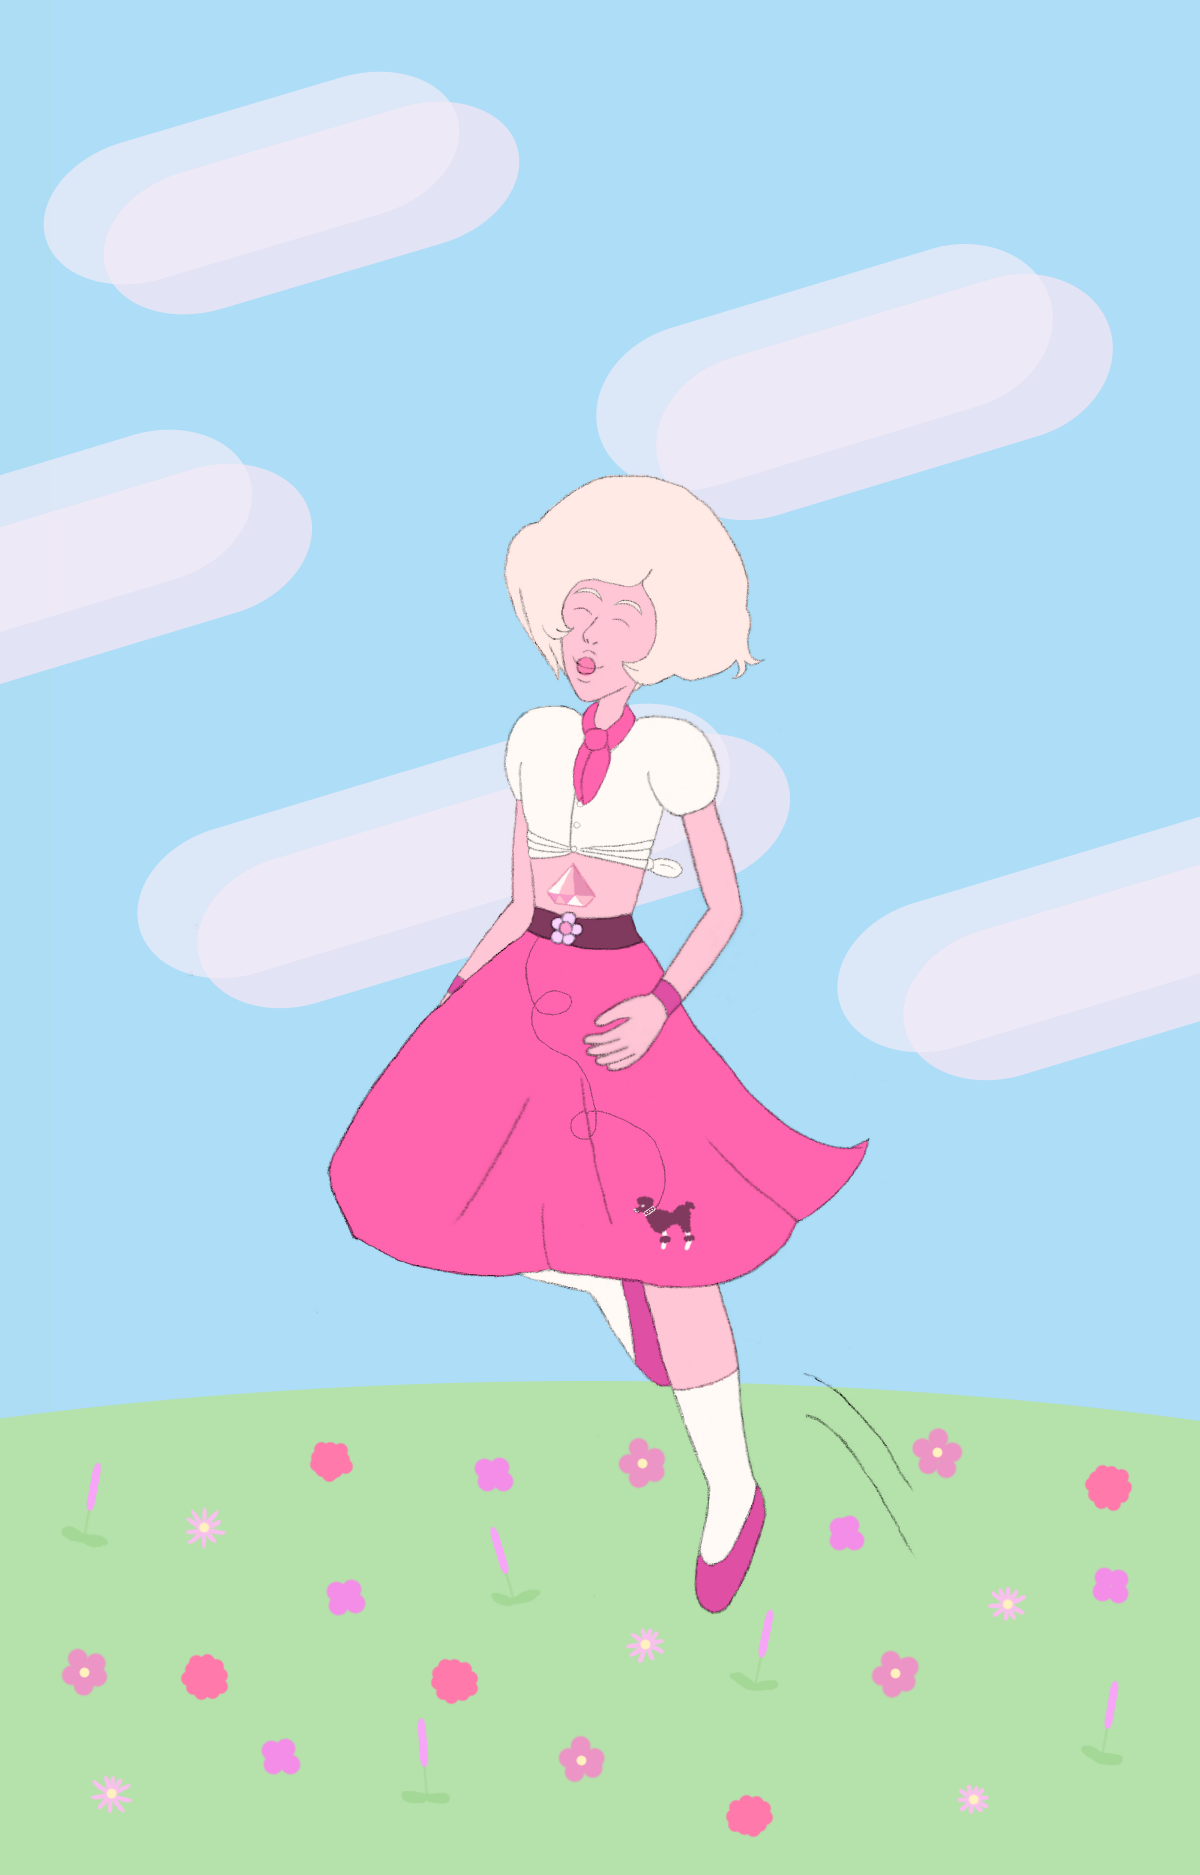 Just a for-fun thing I’ve been working on. (Most background flowers, and flower-like background elements in SU are pink.)